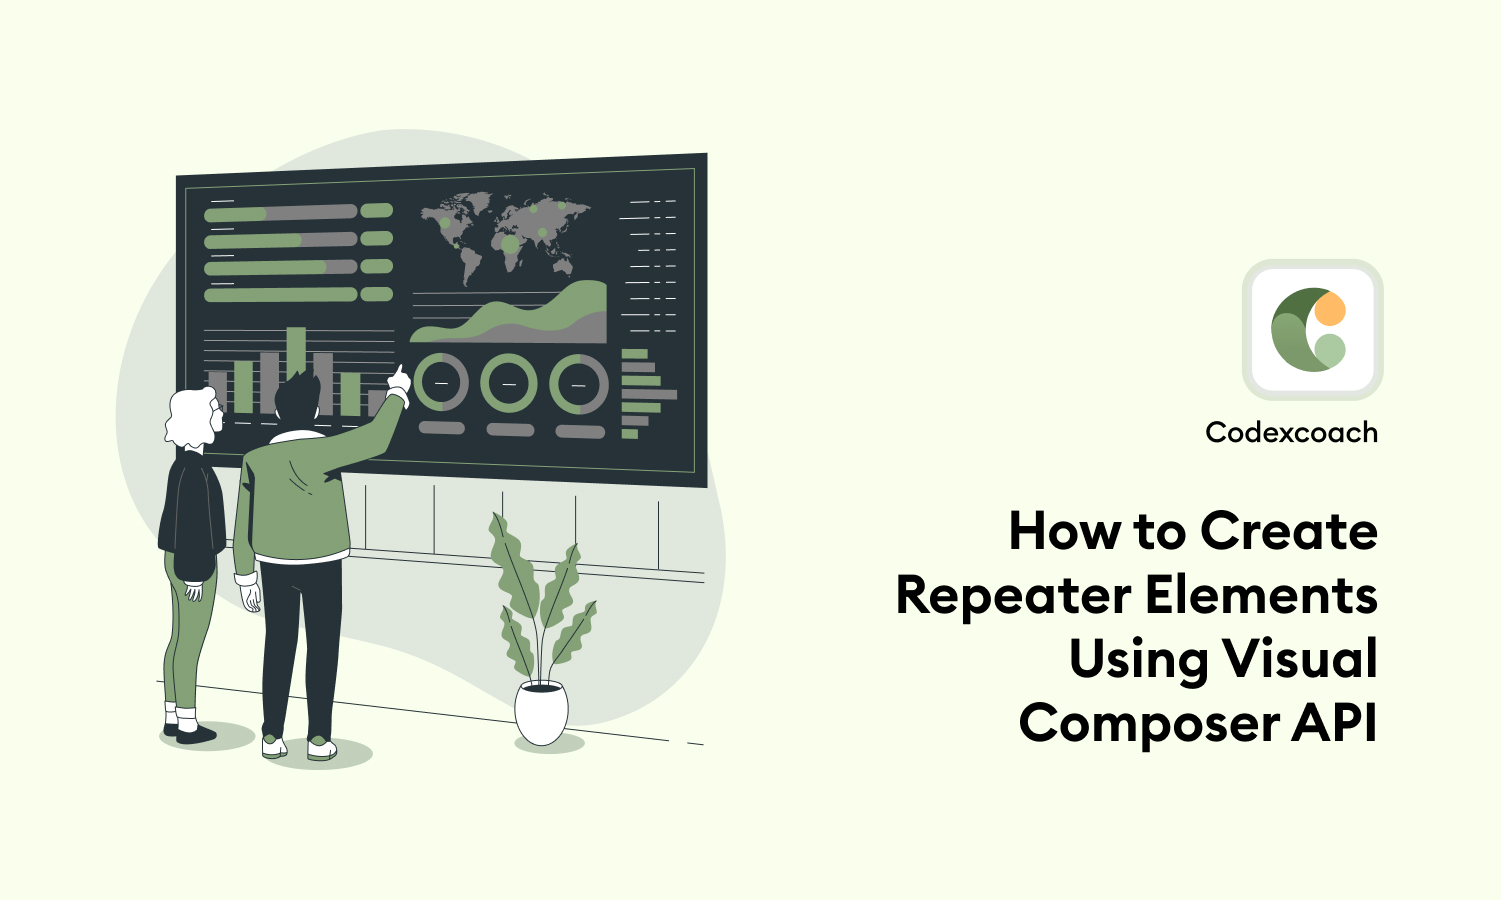 How to Create Repeater Elements Using Visual Composer API